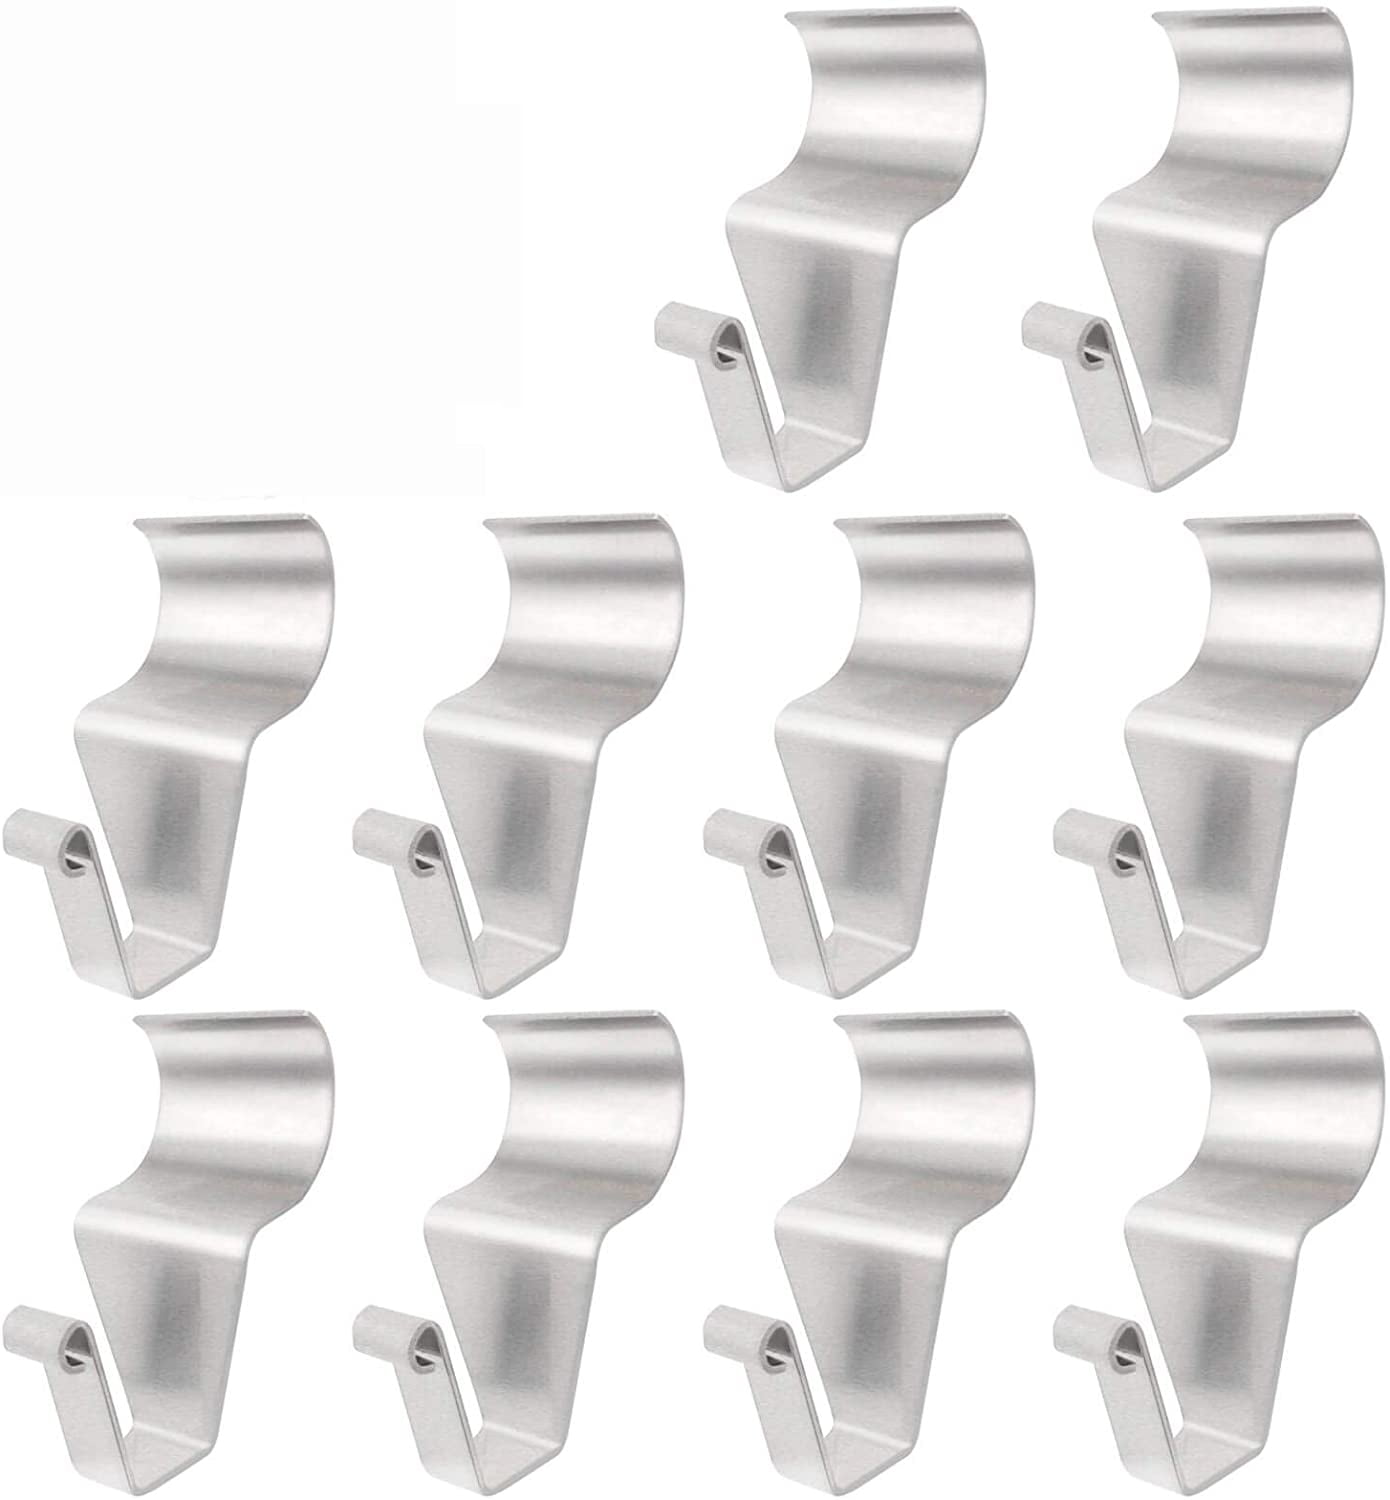  SZLY Vinyl siding Hook Hanger (Pack of 10)-Heavy Duty Stainless  Steel, Non-Porous Vinyl siding Clip for Hanging, S-Shaped Hook to Hide Wall  Joints, Vinyl siding Hook for Outdoor Decoration : Home